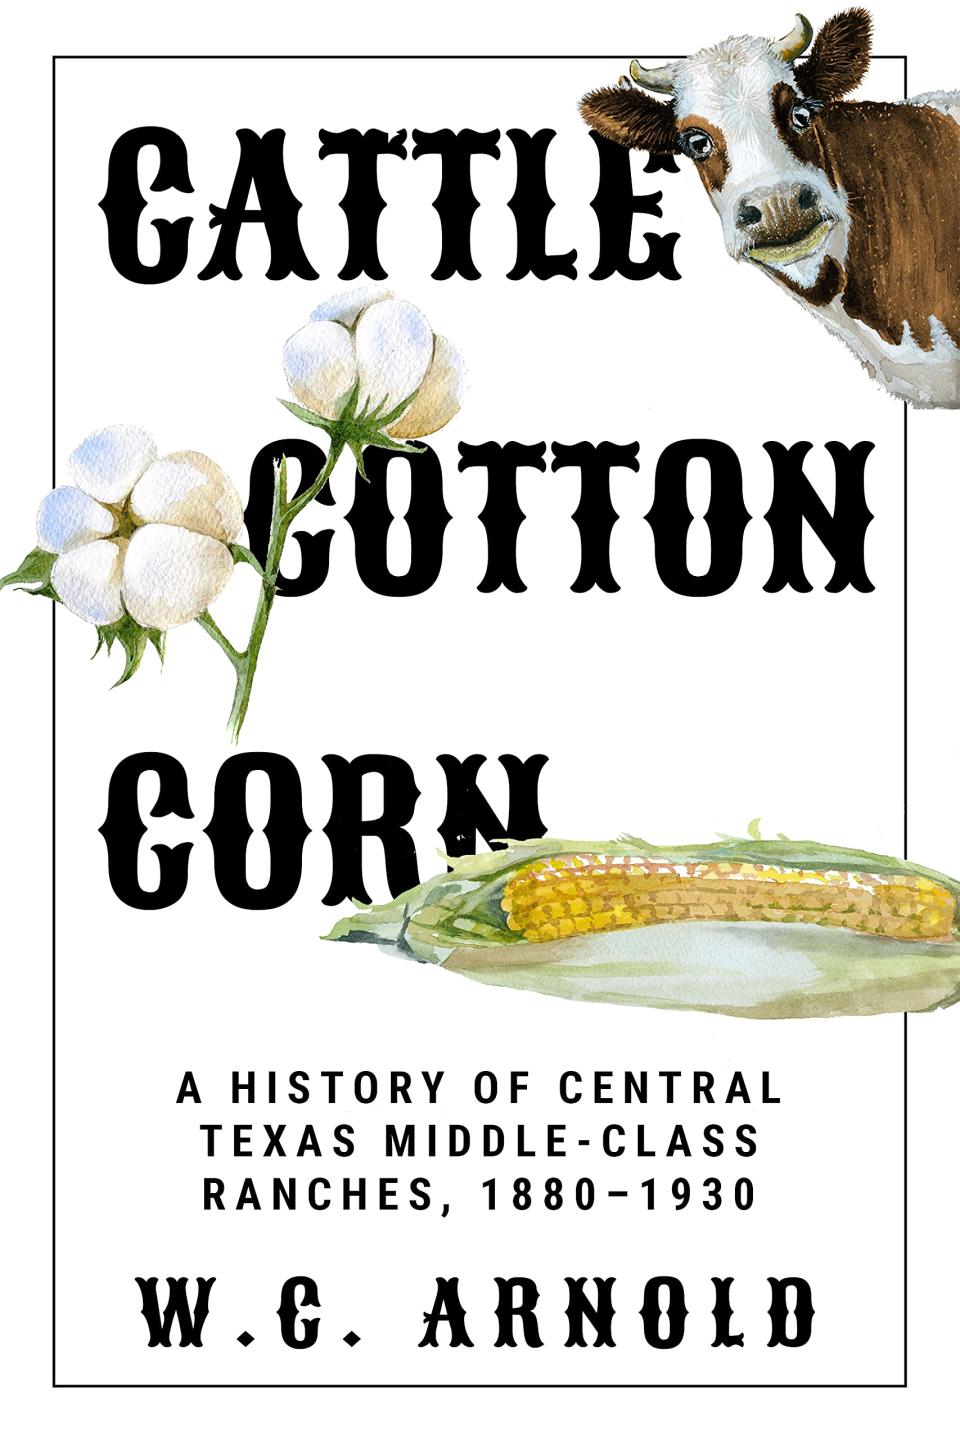 "Cattle, Cotton, Corn: A History of Central Texas Ranches, 1880-1930" by W.C. Arnold (Texas Tech University Press) is the result of an enormous amount of research as well as recovered ranch records.